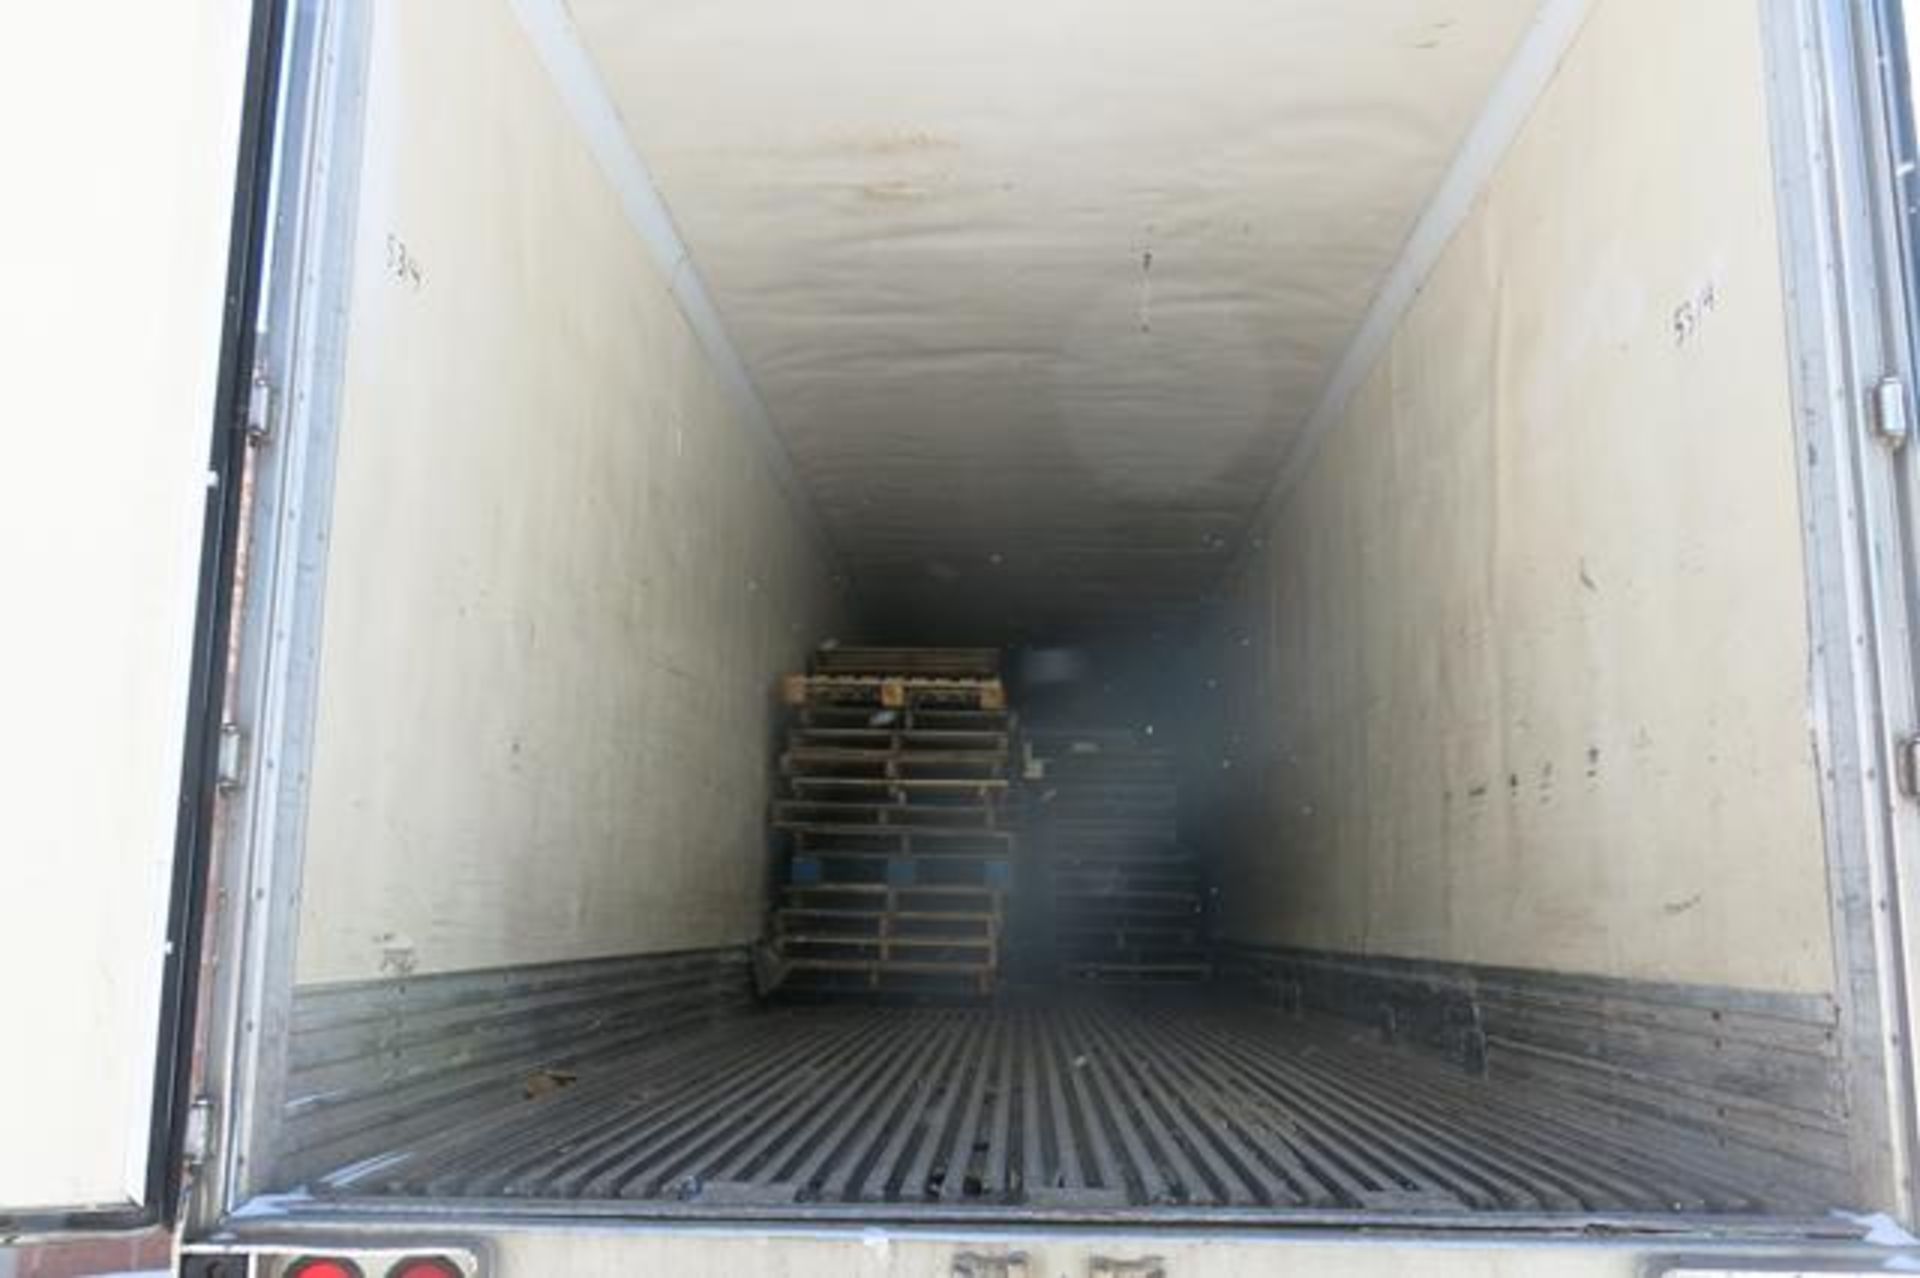 TRAILMOBILE, 53' REFRIGERATED VAN TRAILER, BARN DOORS, THERMO KING, SB-210, REEFER, 8,981 HOURS, - Image 4 of 11